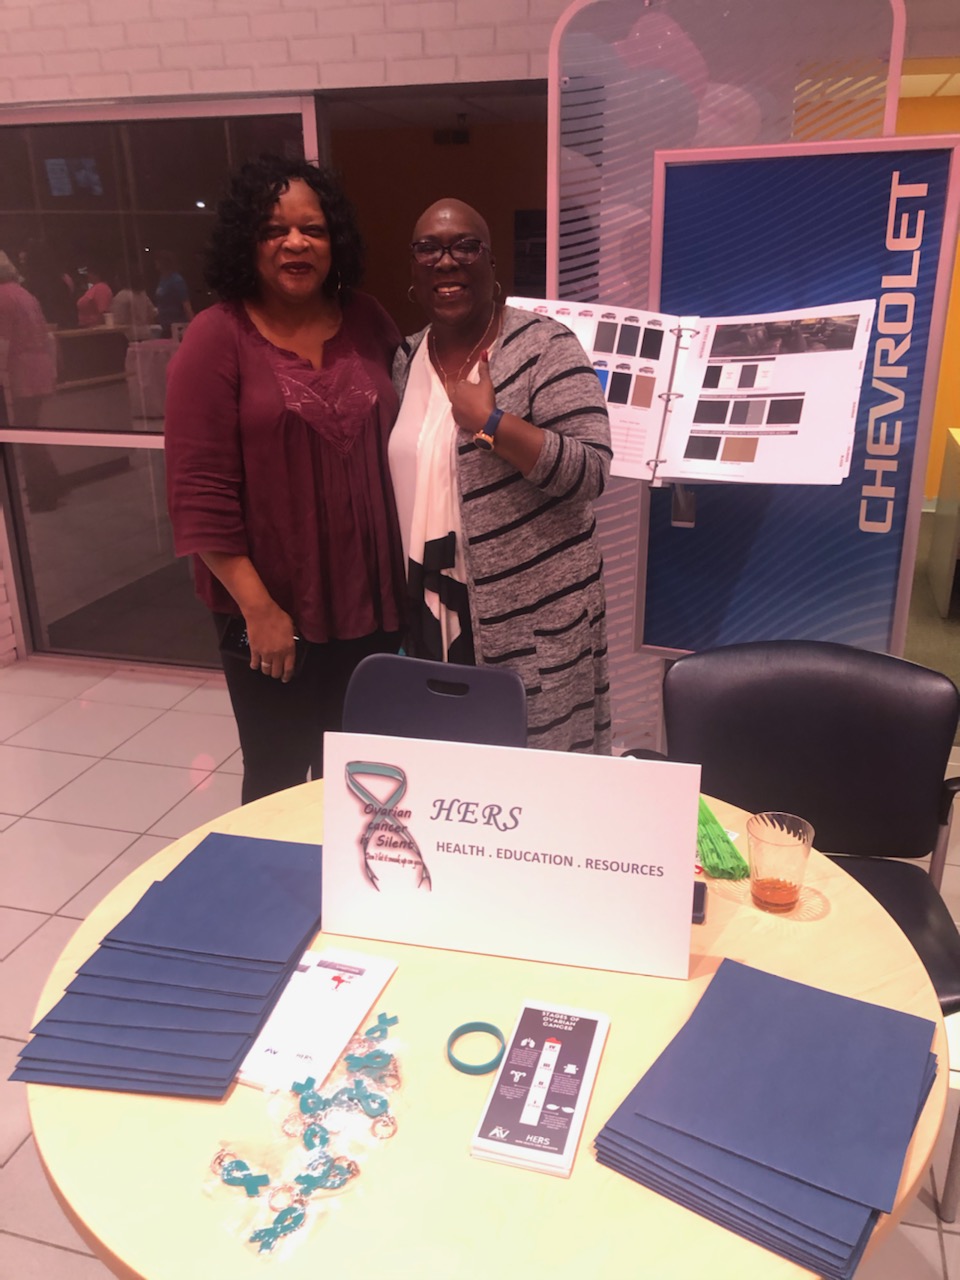 2 Women showcasing their table about HERS organization